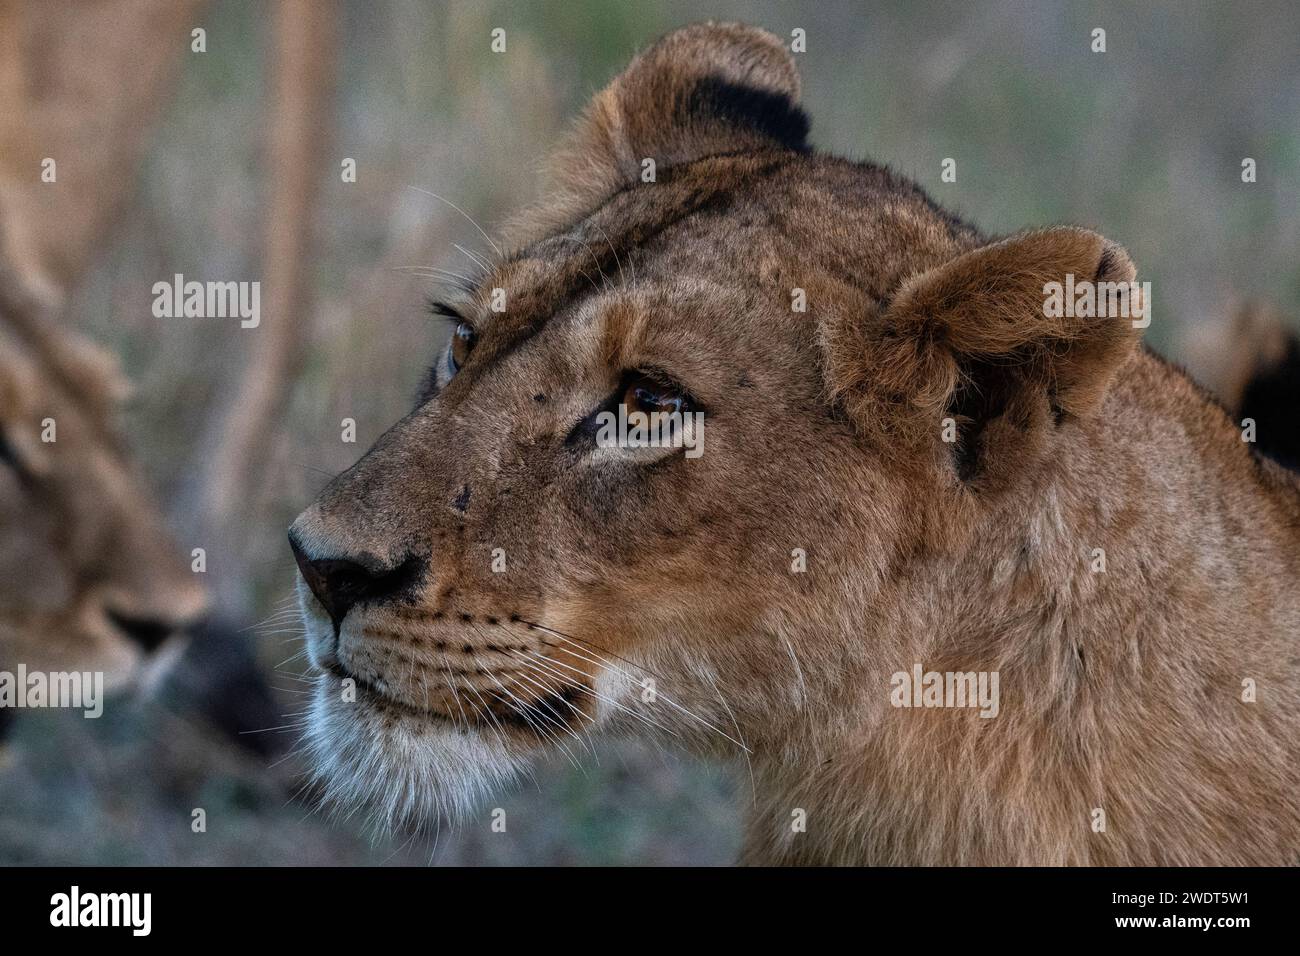 Lioness (Panthera leo), Sabi Sands Game Reserve, South Africa, Africa Stock Photo